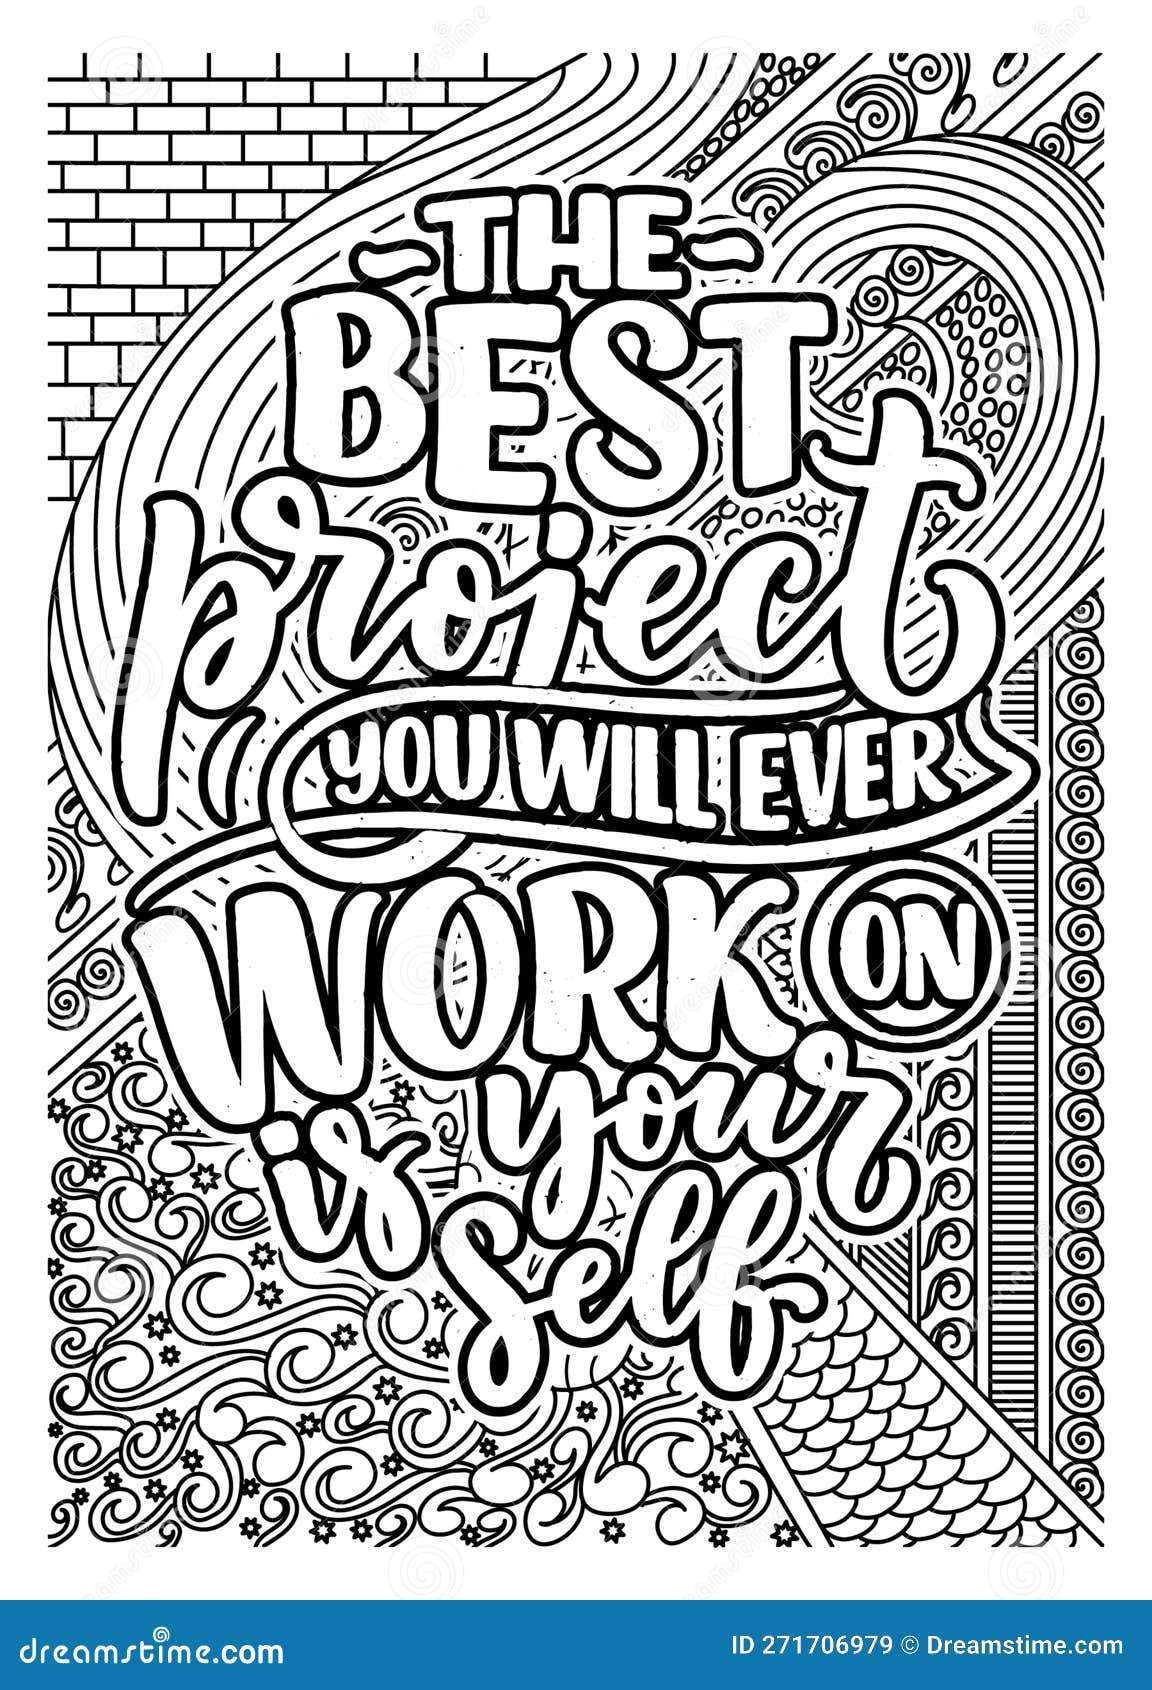 Inspirational quote coloring pages for adults motivational quotes coloring page stock illustration